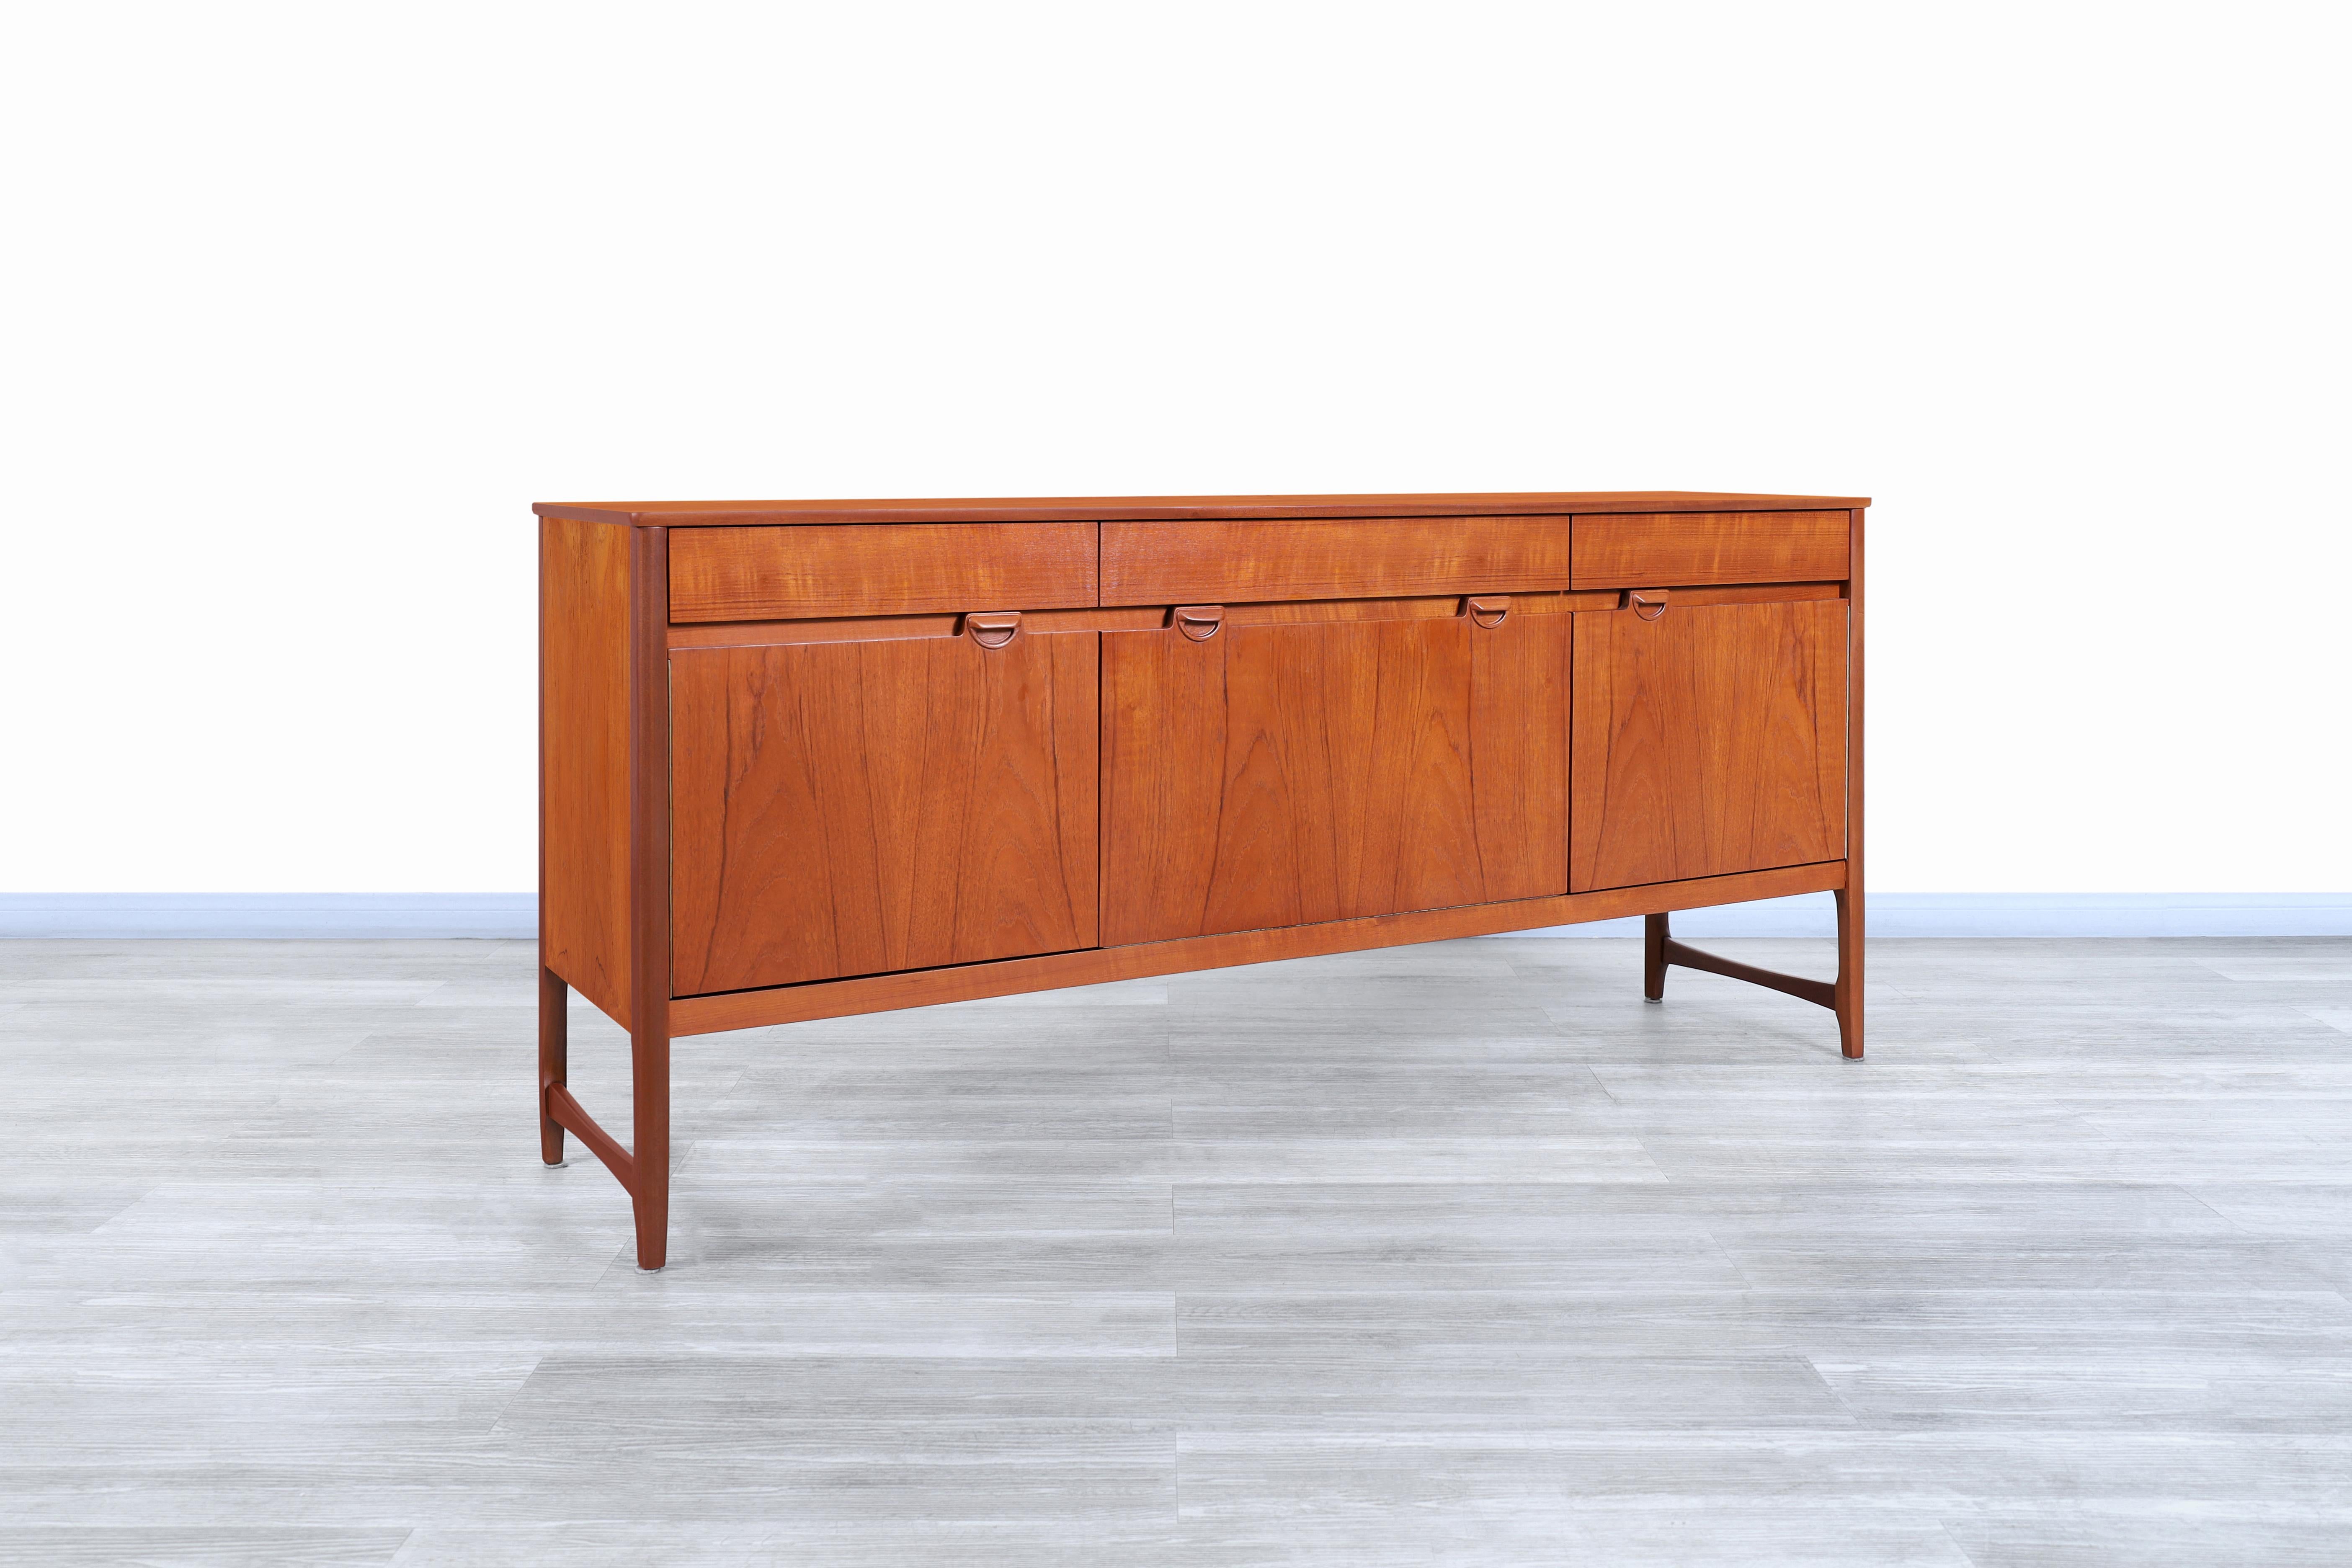 Stunning Mid-Century Modern teak credenza designed and manufactured for Natham Furniture in England, circa 1960s. This credenza has a Minimalist design where the teak wood in which this piece was built stands out thanks to its grain. It offers a